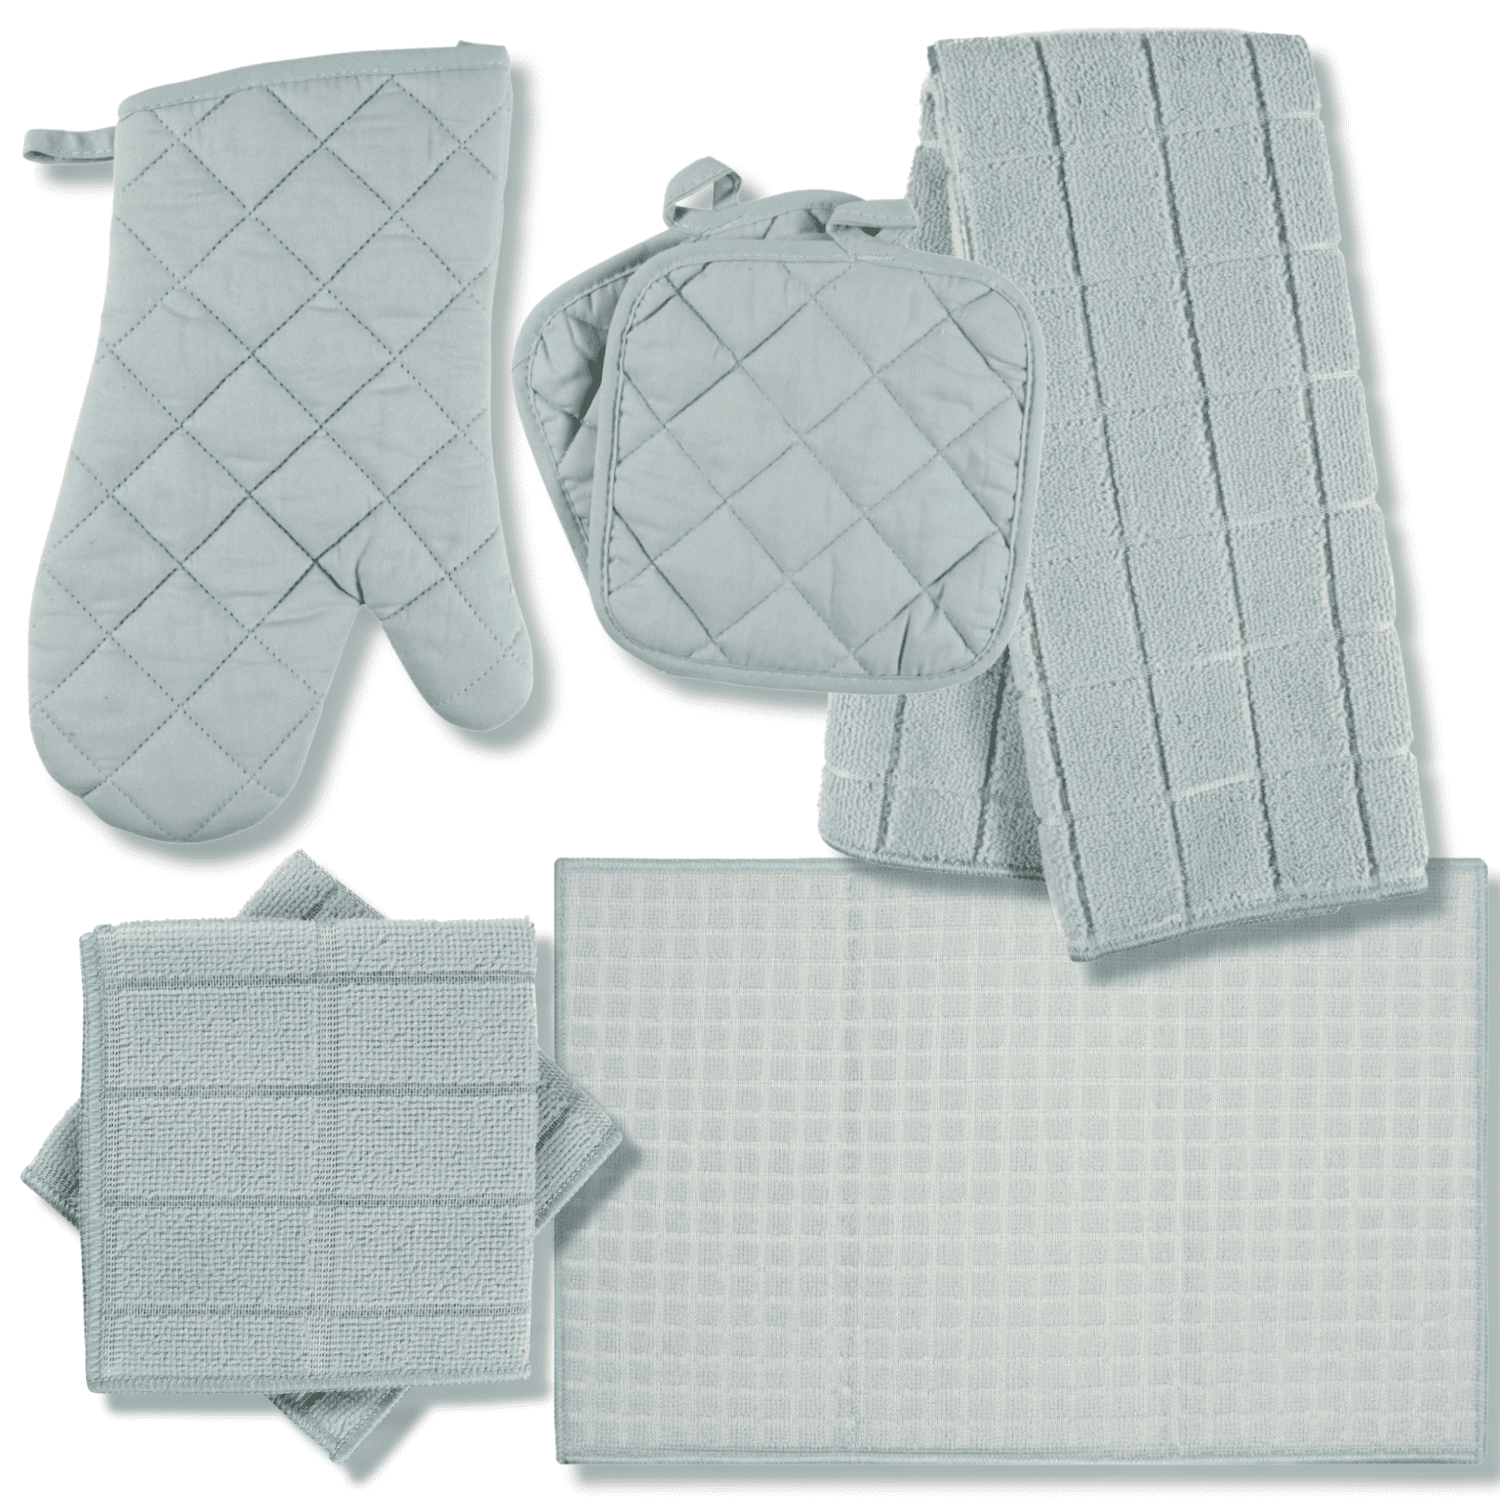 2 POT HOLDERS,1 OVEN MITT & 2 TOWELS COFFEE BISTRO,MS 2 RAGS Details about   7 pc KITCHEN SET 